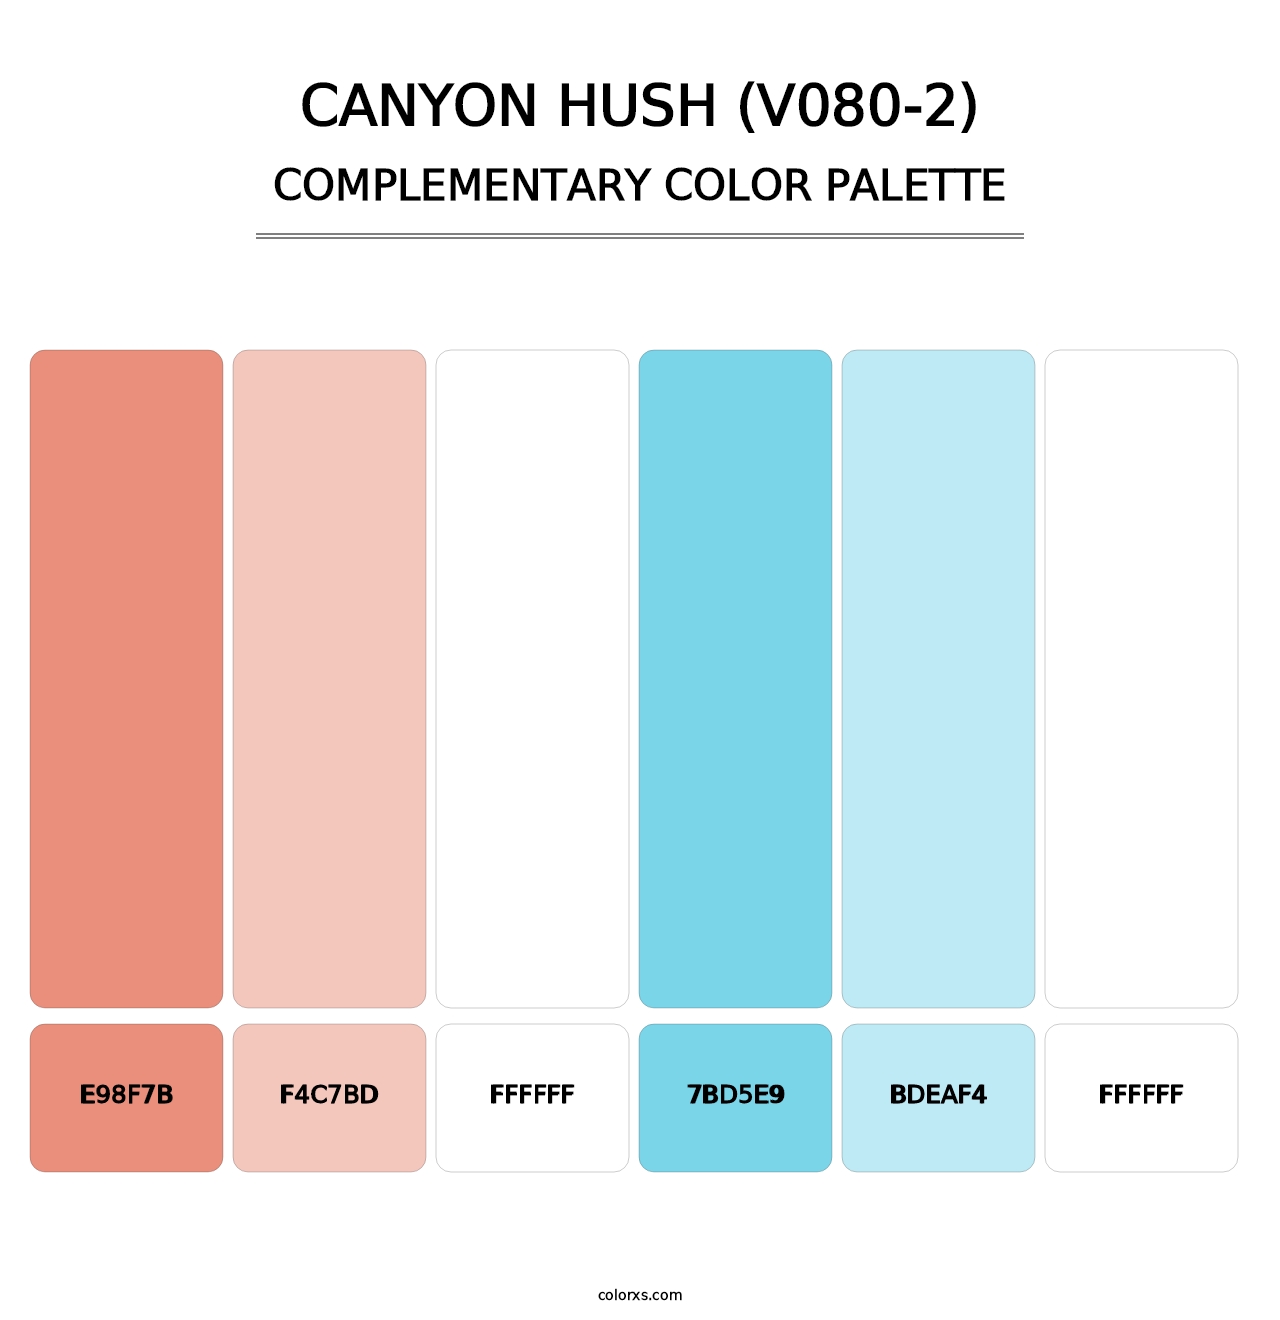 Canyon Hush (V080-2) - Complementary Color Palette